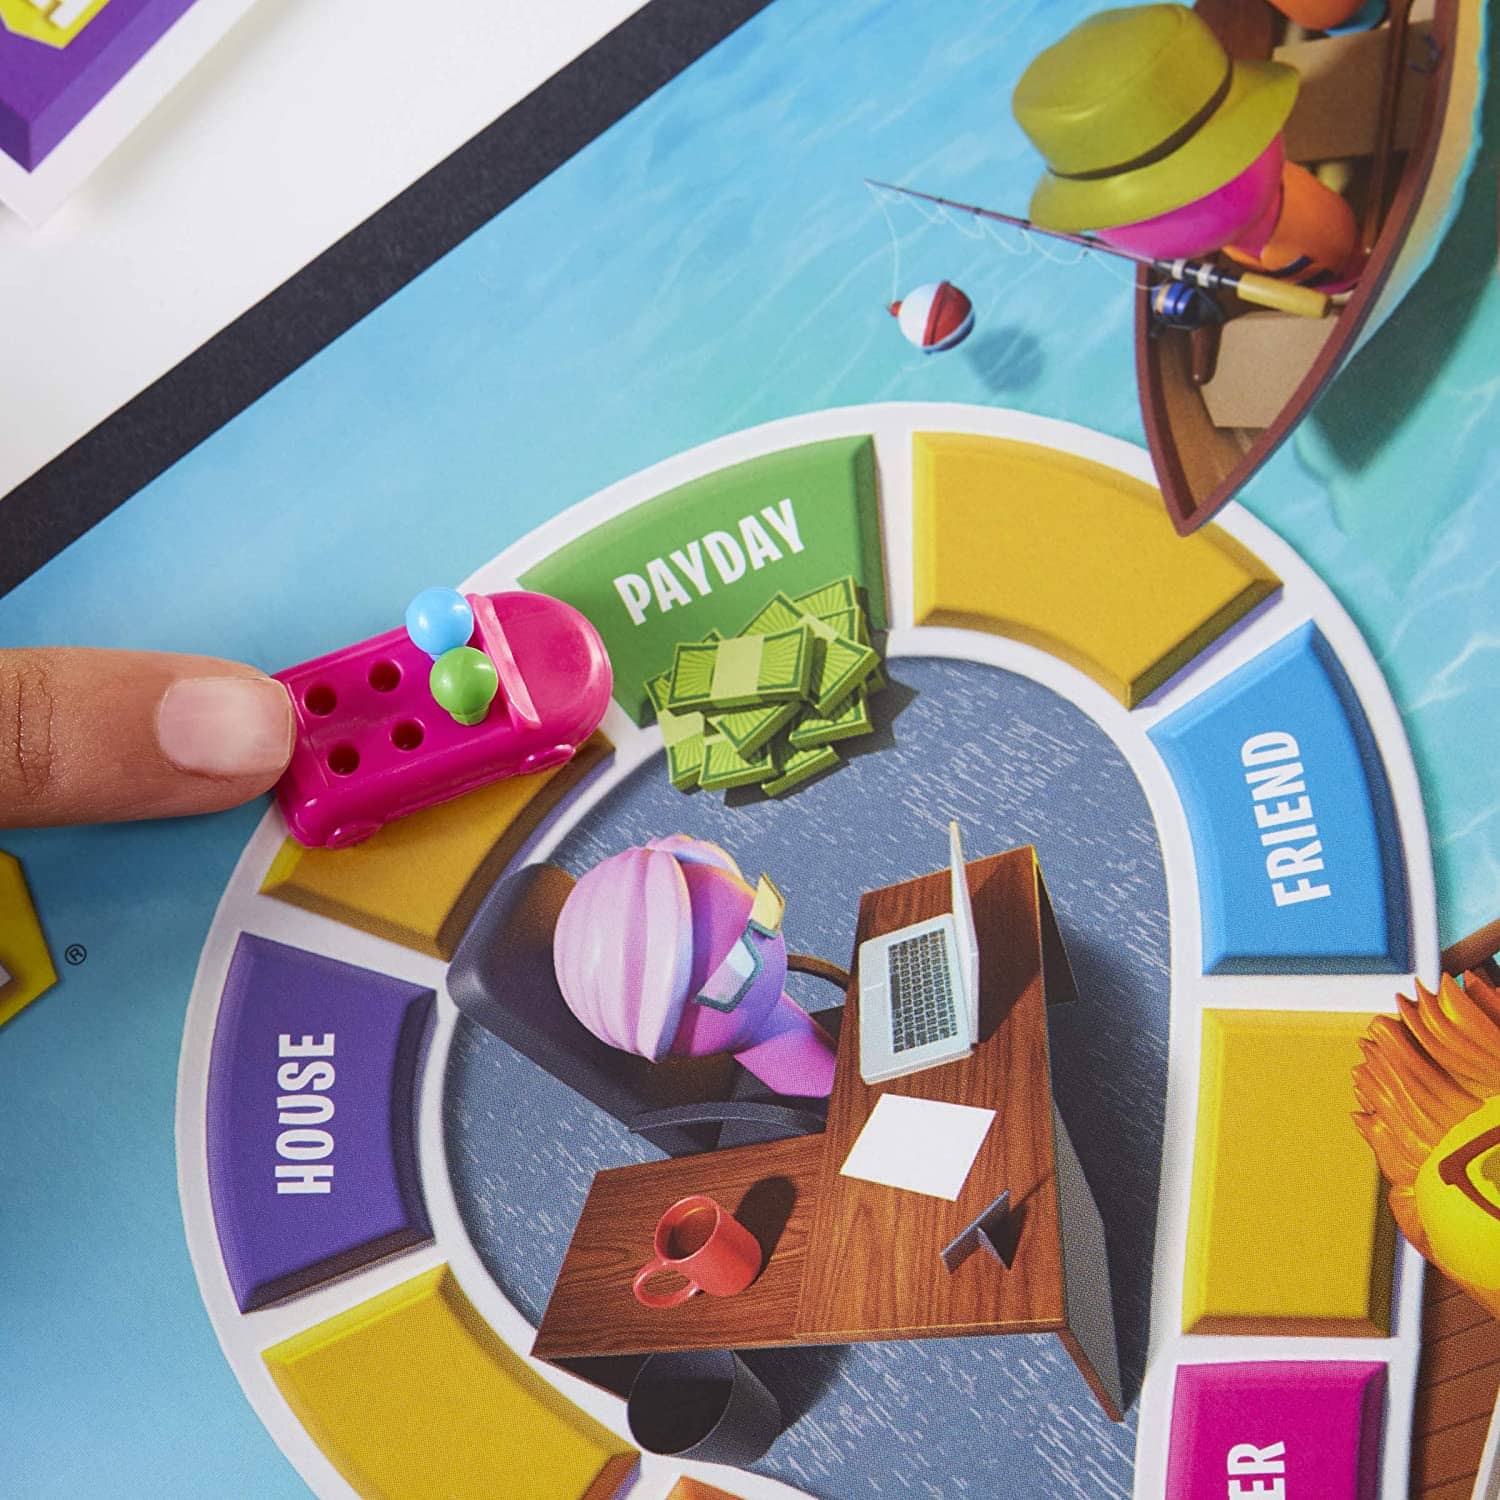 Game of Life 2021 'Your Life Your Way' in a lifestyle photoshoot with a close up on a pink car with multi color pegs. Made by Hasbro Gaming